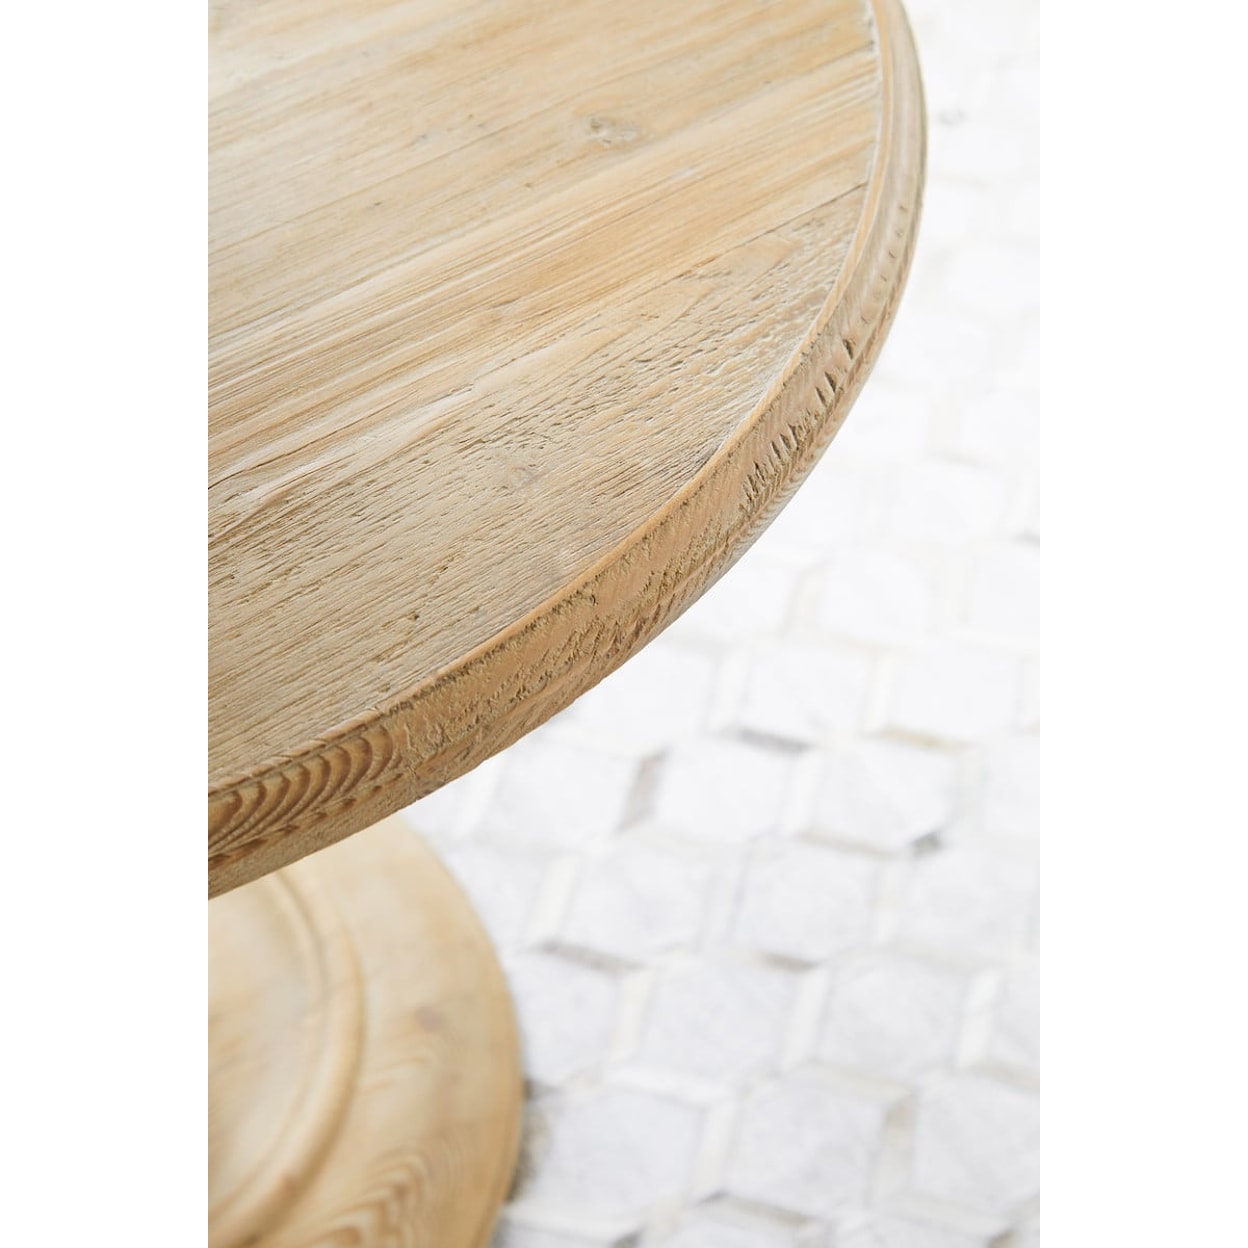 Essentials for Living Chelsea 36" Round Dining Table